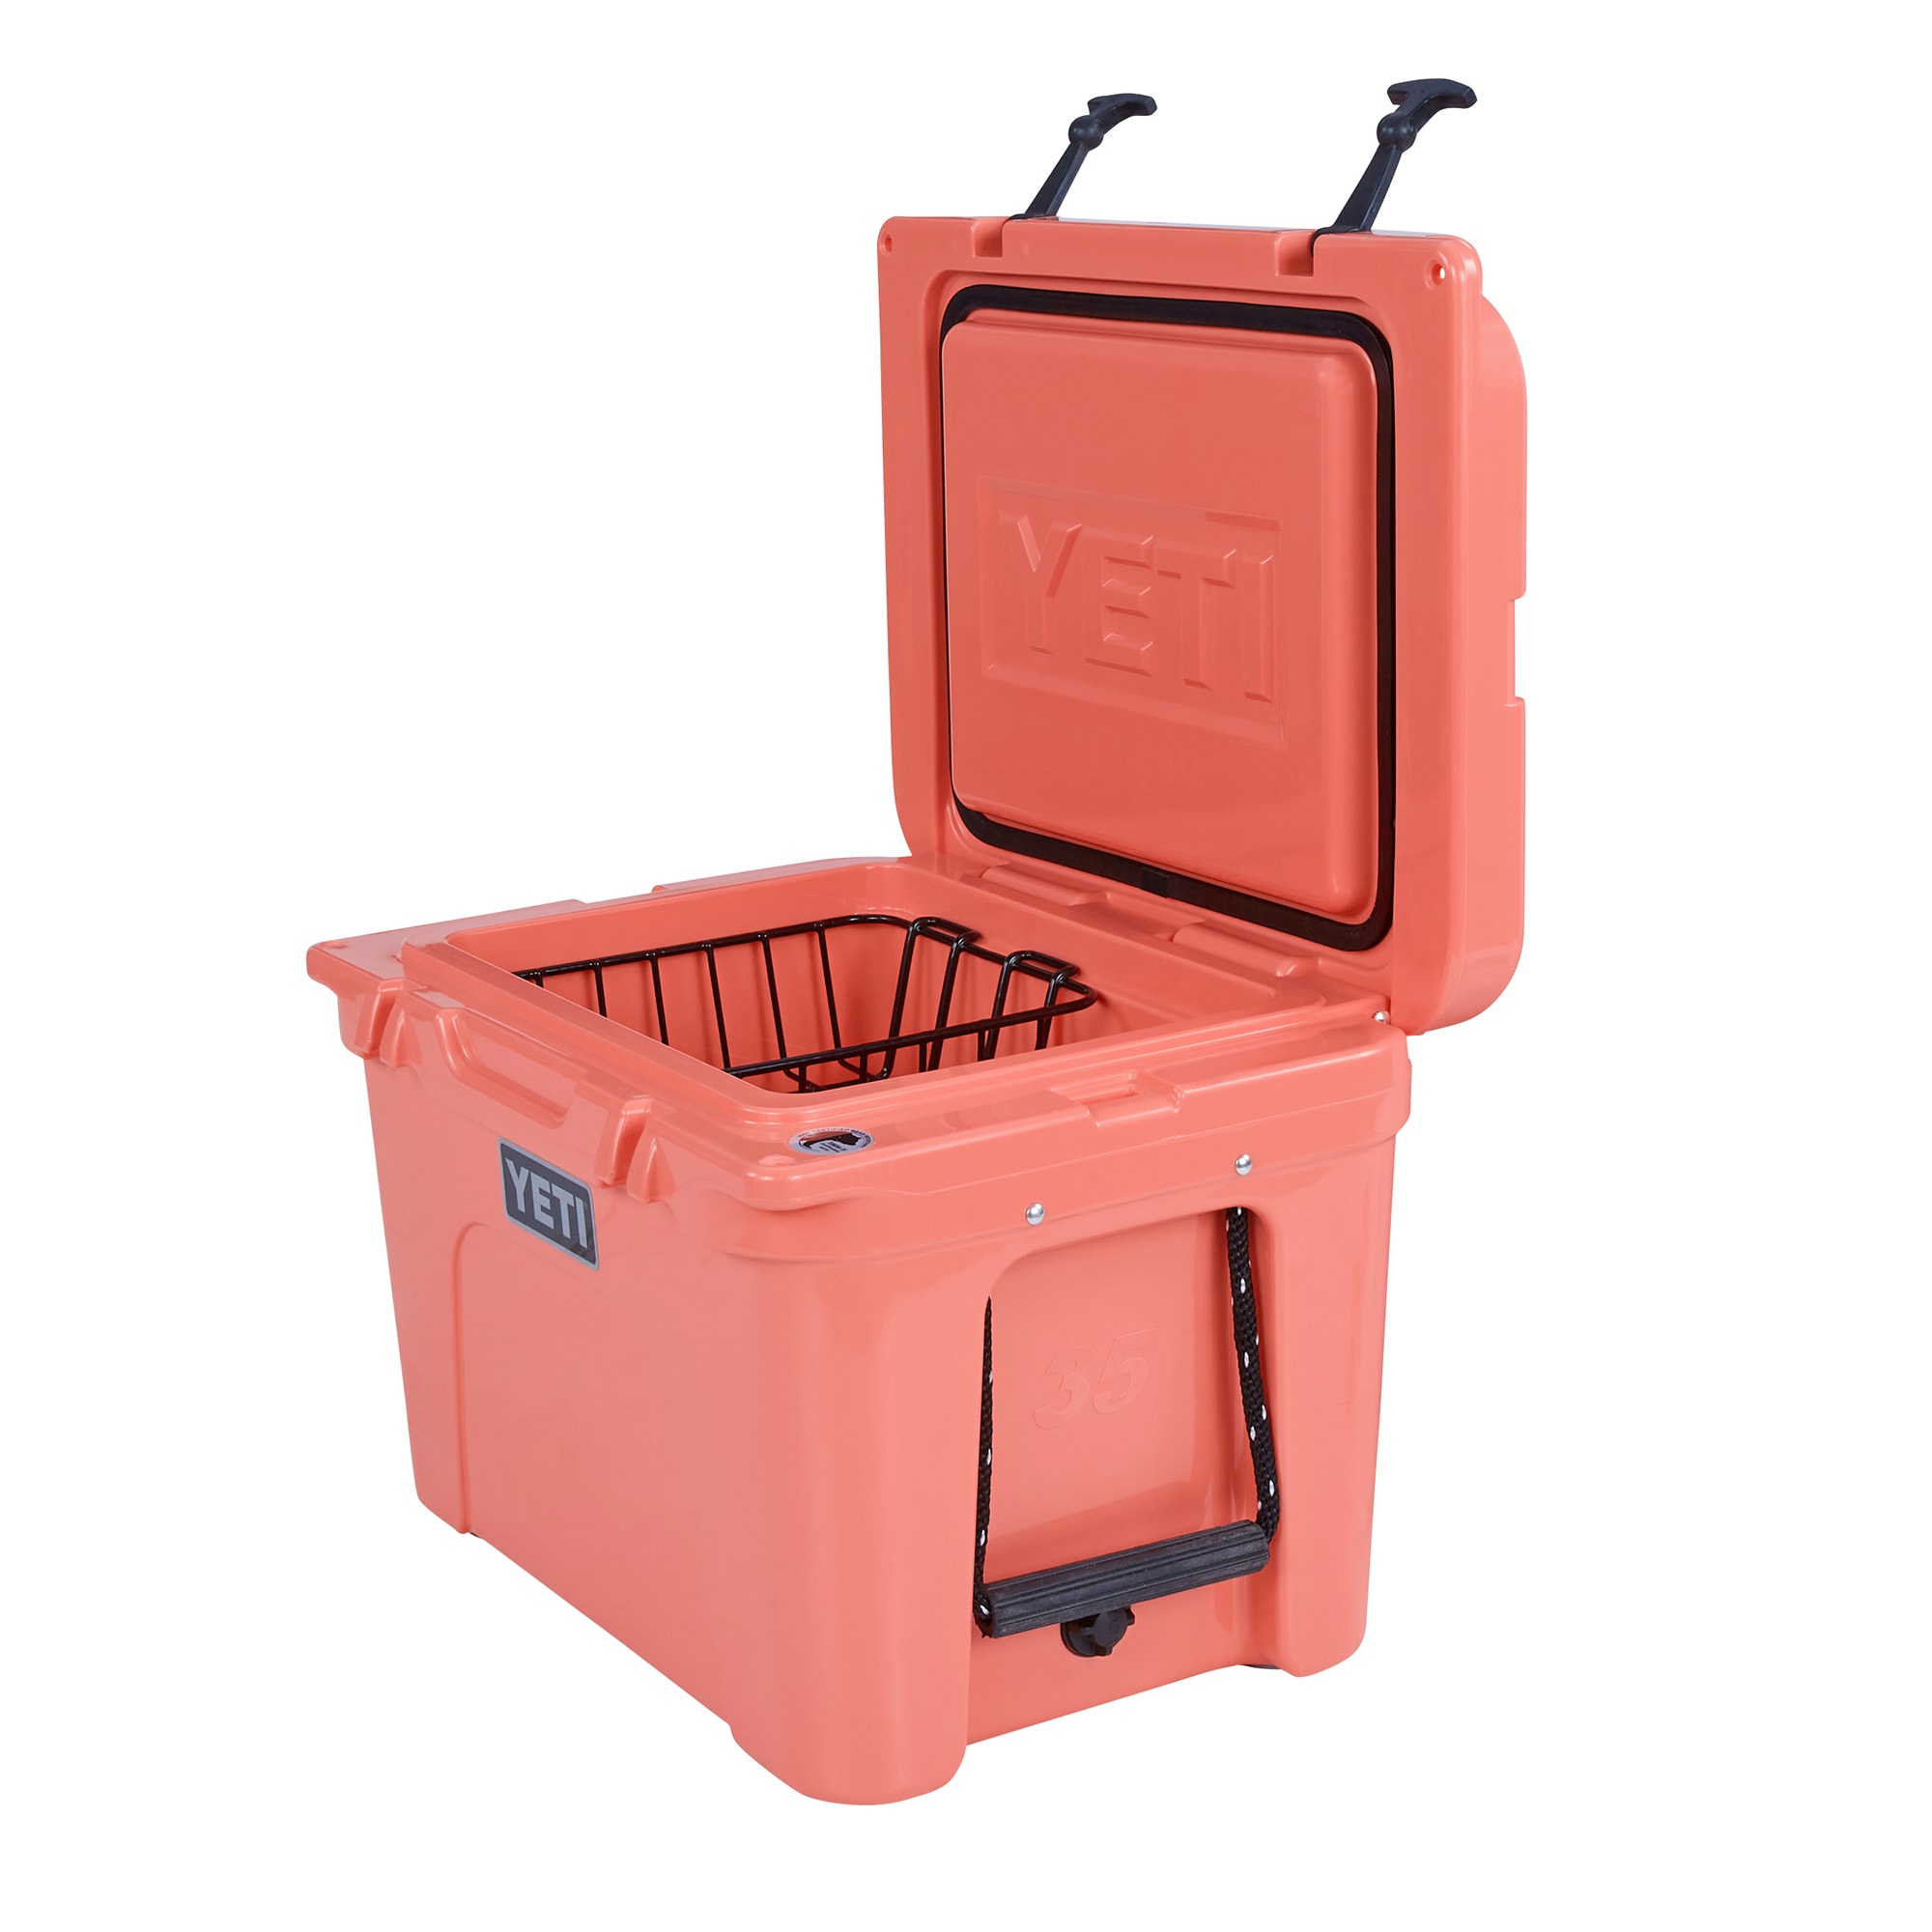 Yeti Tundra 45 Hard Cooler - Coral for sale online